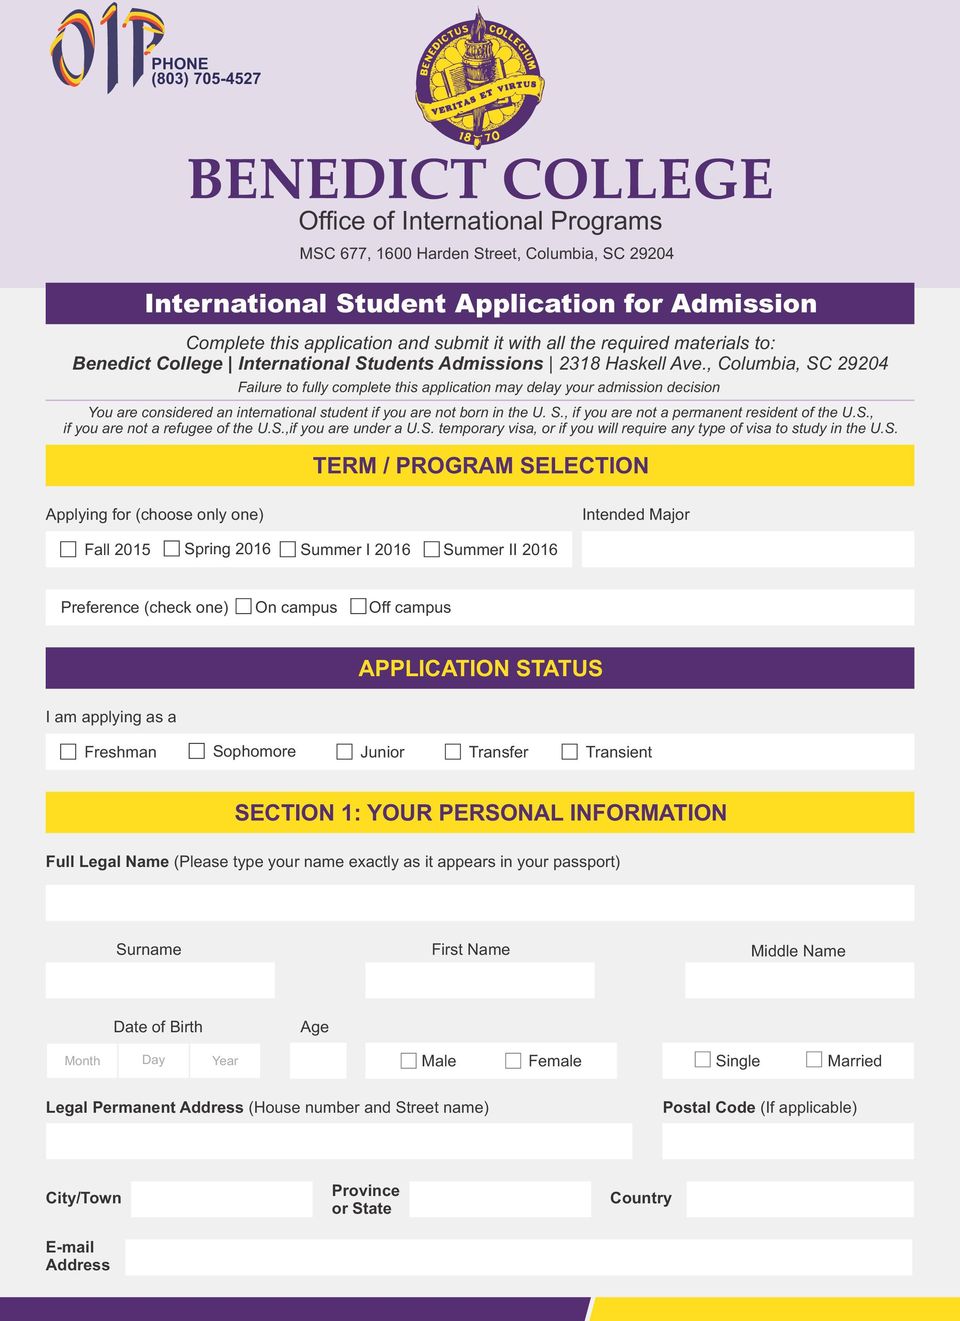 , Columbia, SC 29204 Failure to fully complete this application may delay your admission decision You are considered an international student if you are not born in the U. S., if you are not a permanent resident of the U.